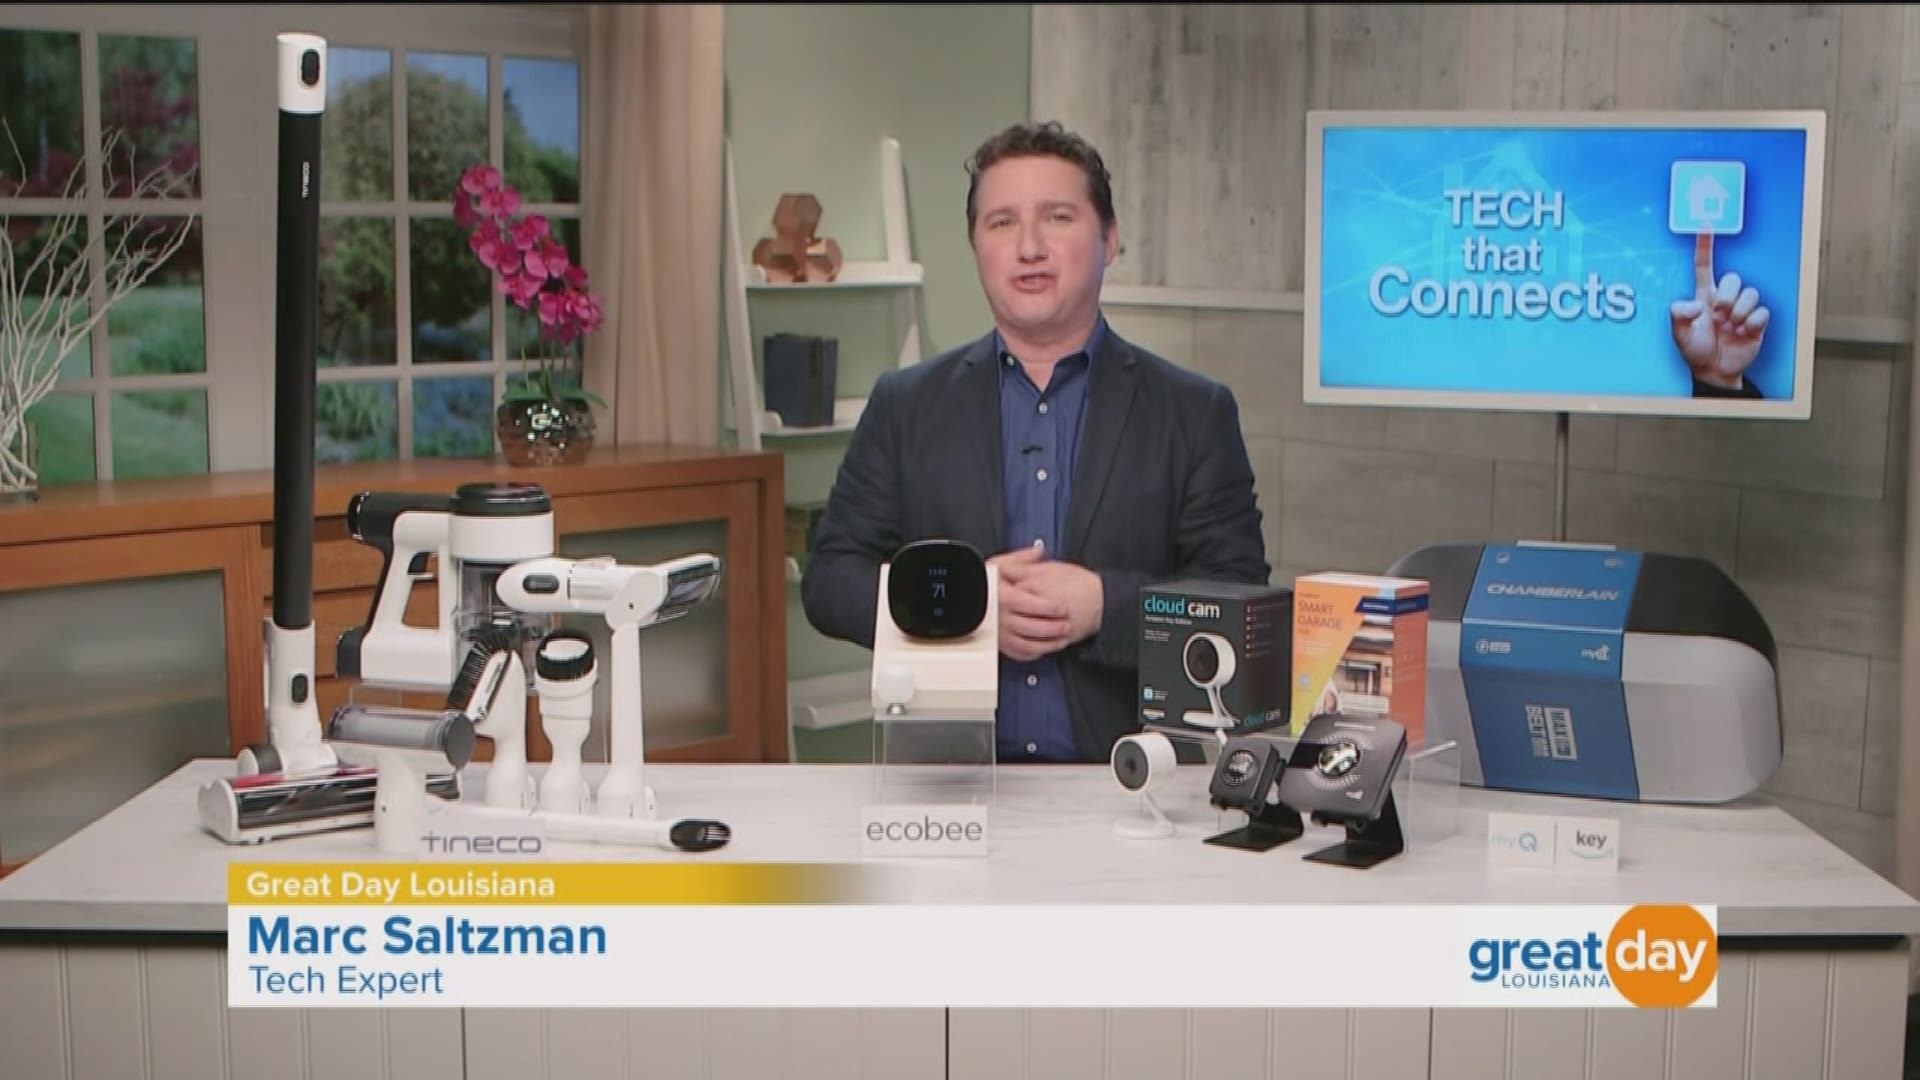 Technology is revolutionizing the way people live their lives at home and on the go. Tech expert Marc Saltzman gives us the inside scoop on some gadgets that can make your life a bit easier.